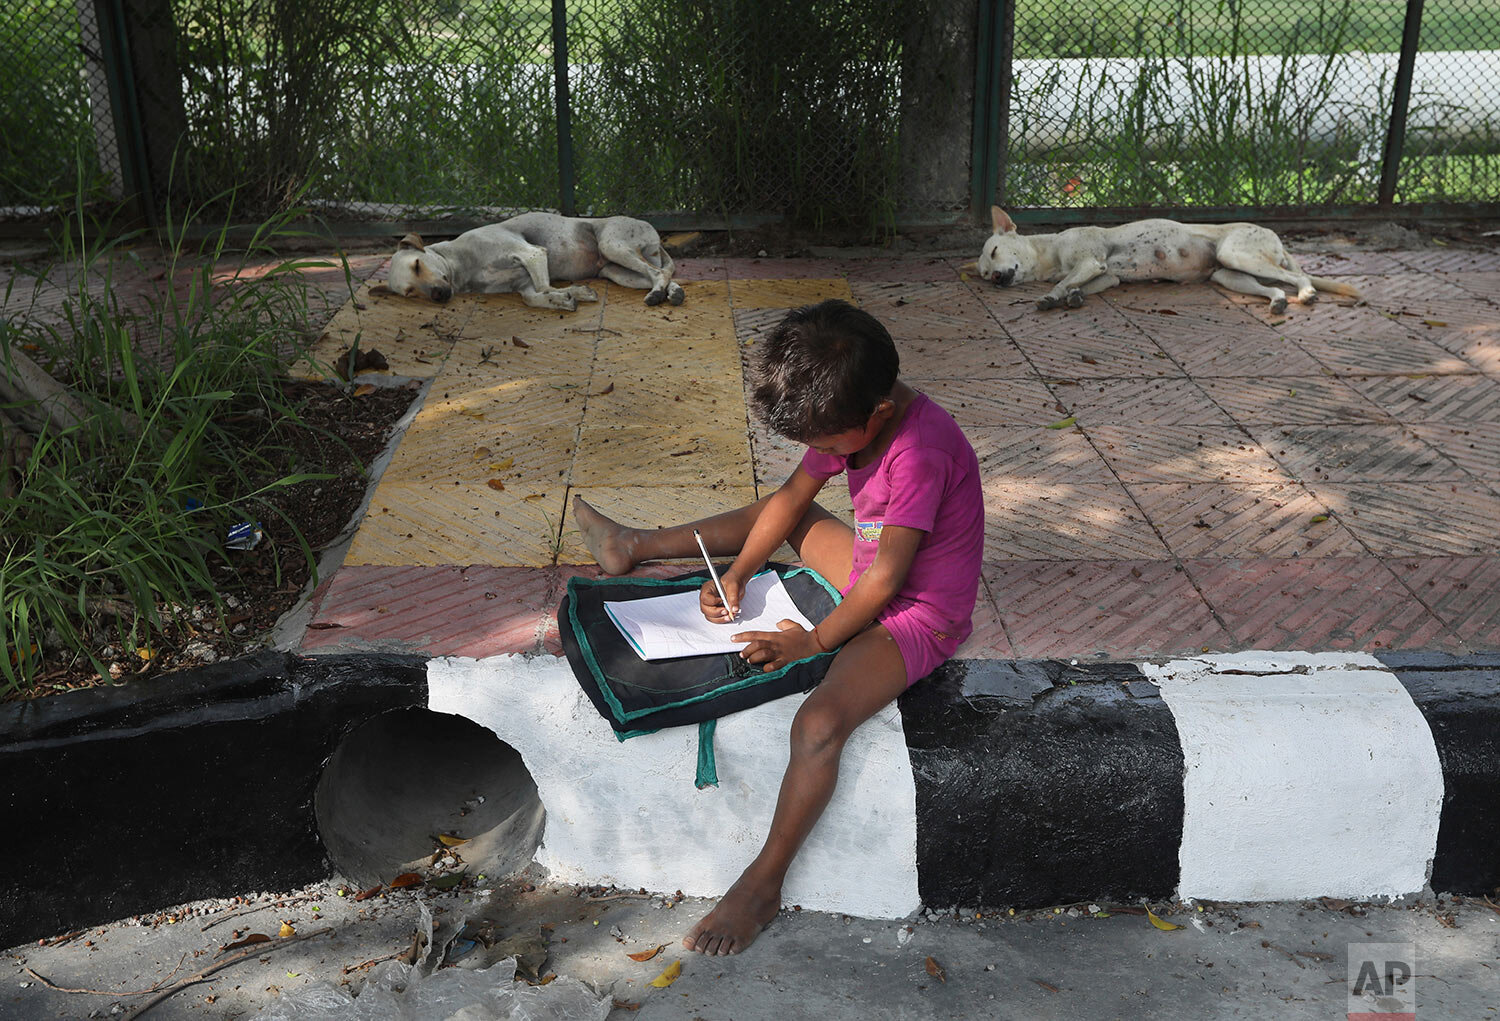  A child practices writing during a sidewalk class taught by an Indian couple, Veena Gupta and her husband Virendra Gupta, in New Delhi, India, on Sept. 3, 2020. (AP Photo/Manish Swarup) 